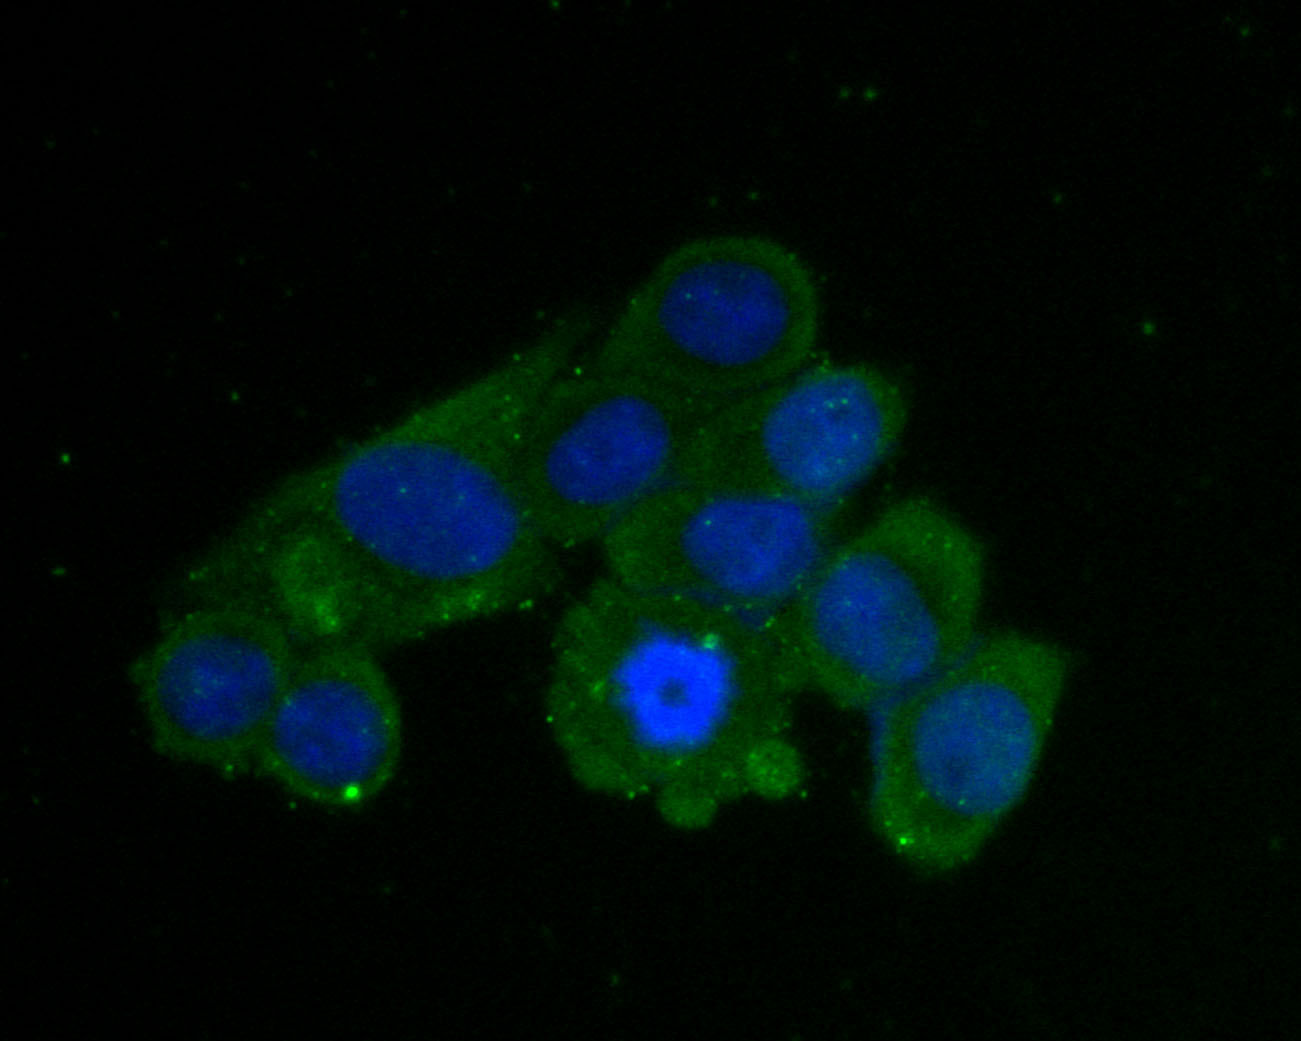 ICC staining of AKR1B1 in Siha cells (green). Formalin fixed cells were permeabilized with 0.1% Triton X-100 in TBS for 10 minutes at room temperature and blocked with 1% Blocker BSA for 15 minutes at room temperature. Cells were probed with the primary antibody (ER2001-28, 1/50) for 1 hour at room temperature, washed with PBS. Alexa Fluor®488 Goat anti-Rabbit IgG was used as the secondary antibody at 1/1,000 dilution. The nuclear counter stain is DAPI (blue).